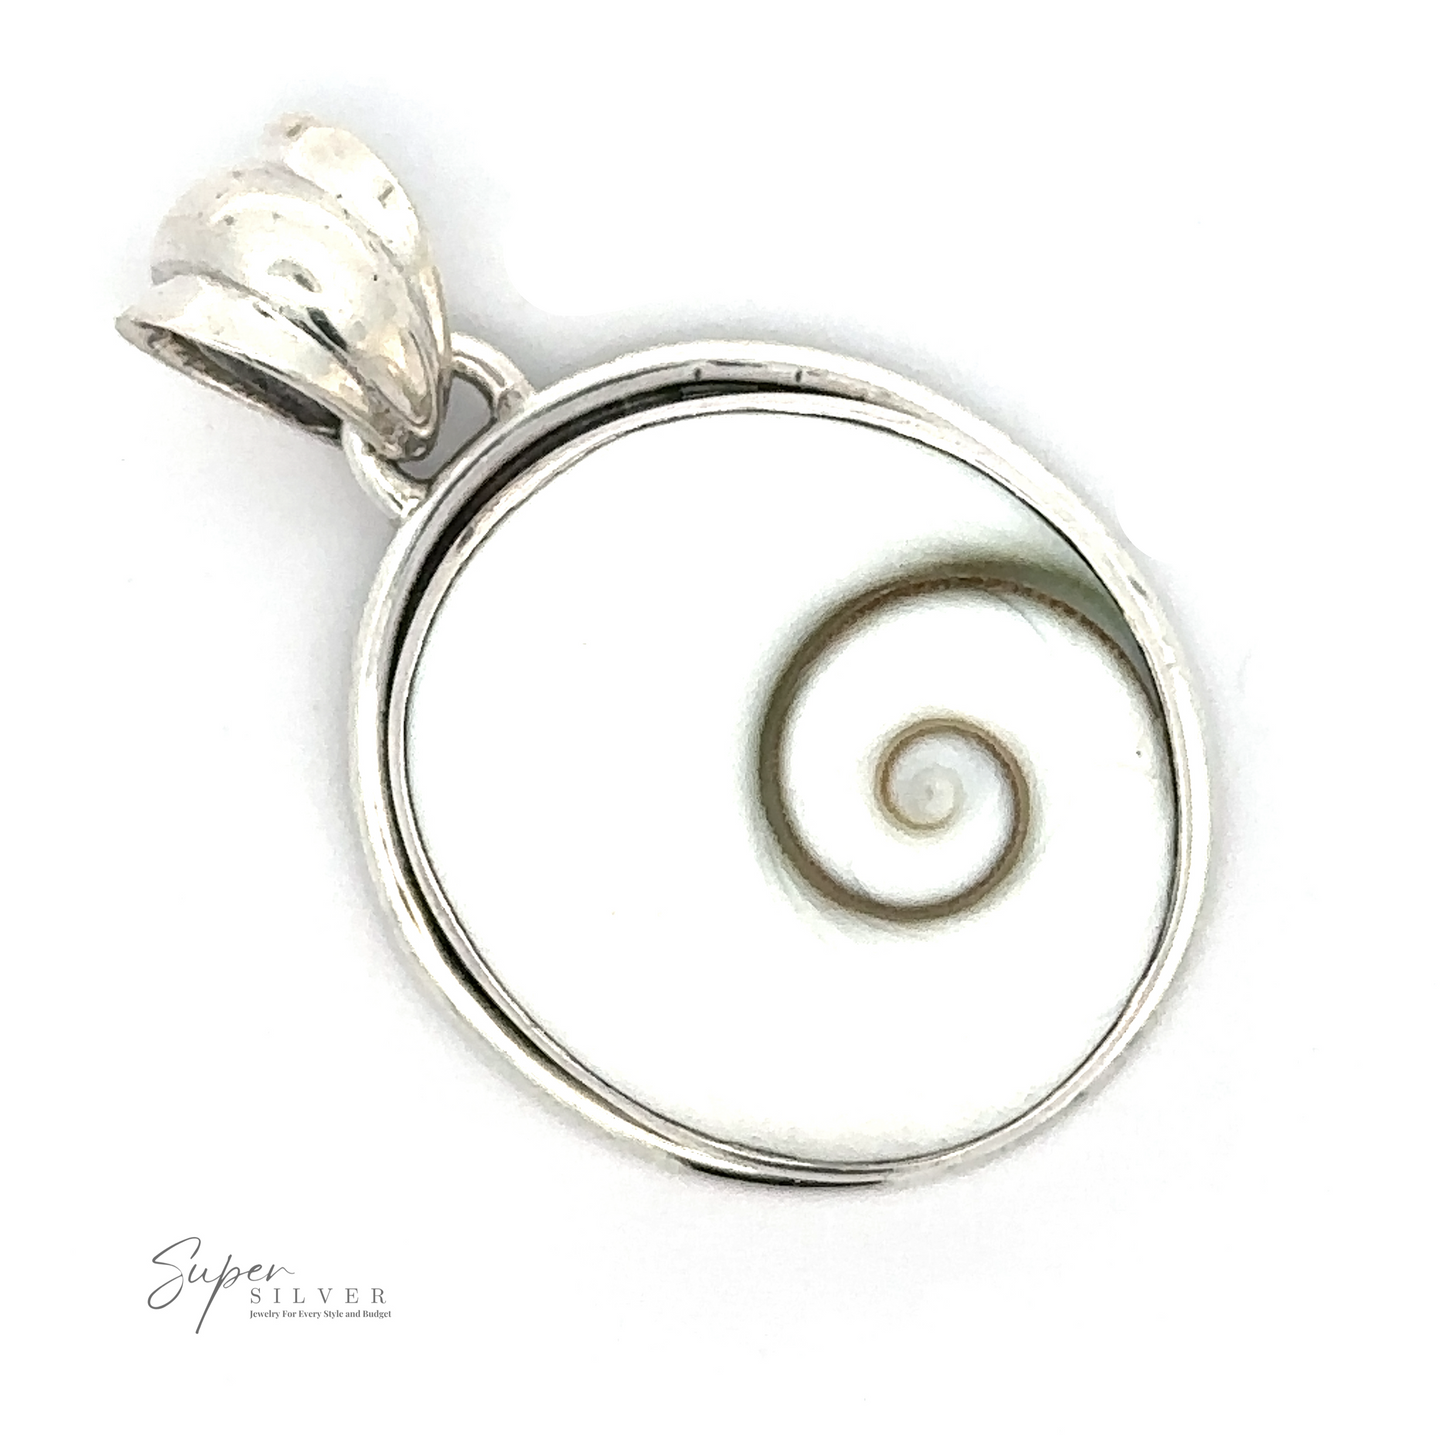 
                  
                    A Shiva Shell Pendant featuring a round white shell with a natural spiral pattern in the center. The shell is encased in a silver frame with a bail for attaching to a chain. Perfect as an ocean lover accessory, the "Super Silver" logo is seen, adding to its bohemian jewelry charm.
                  
                